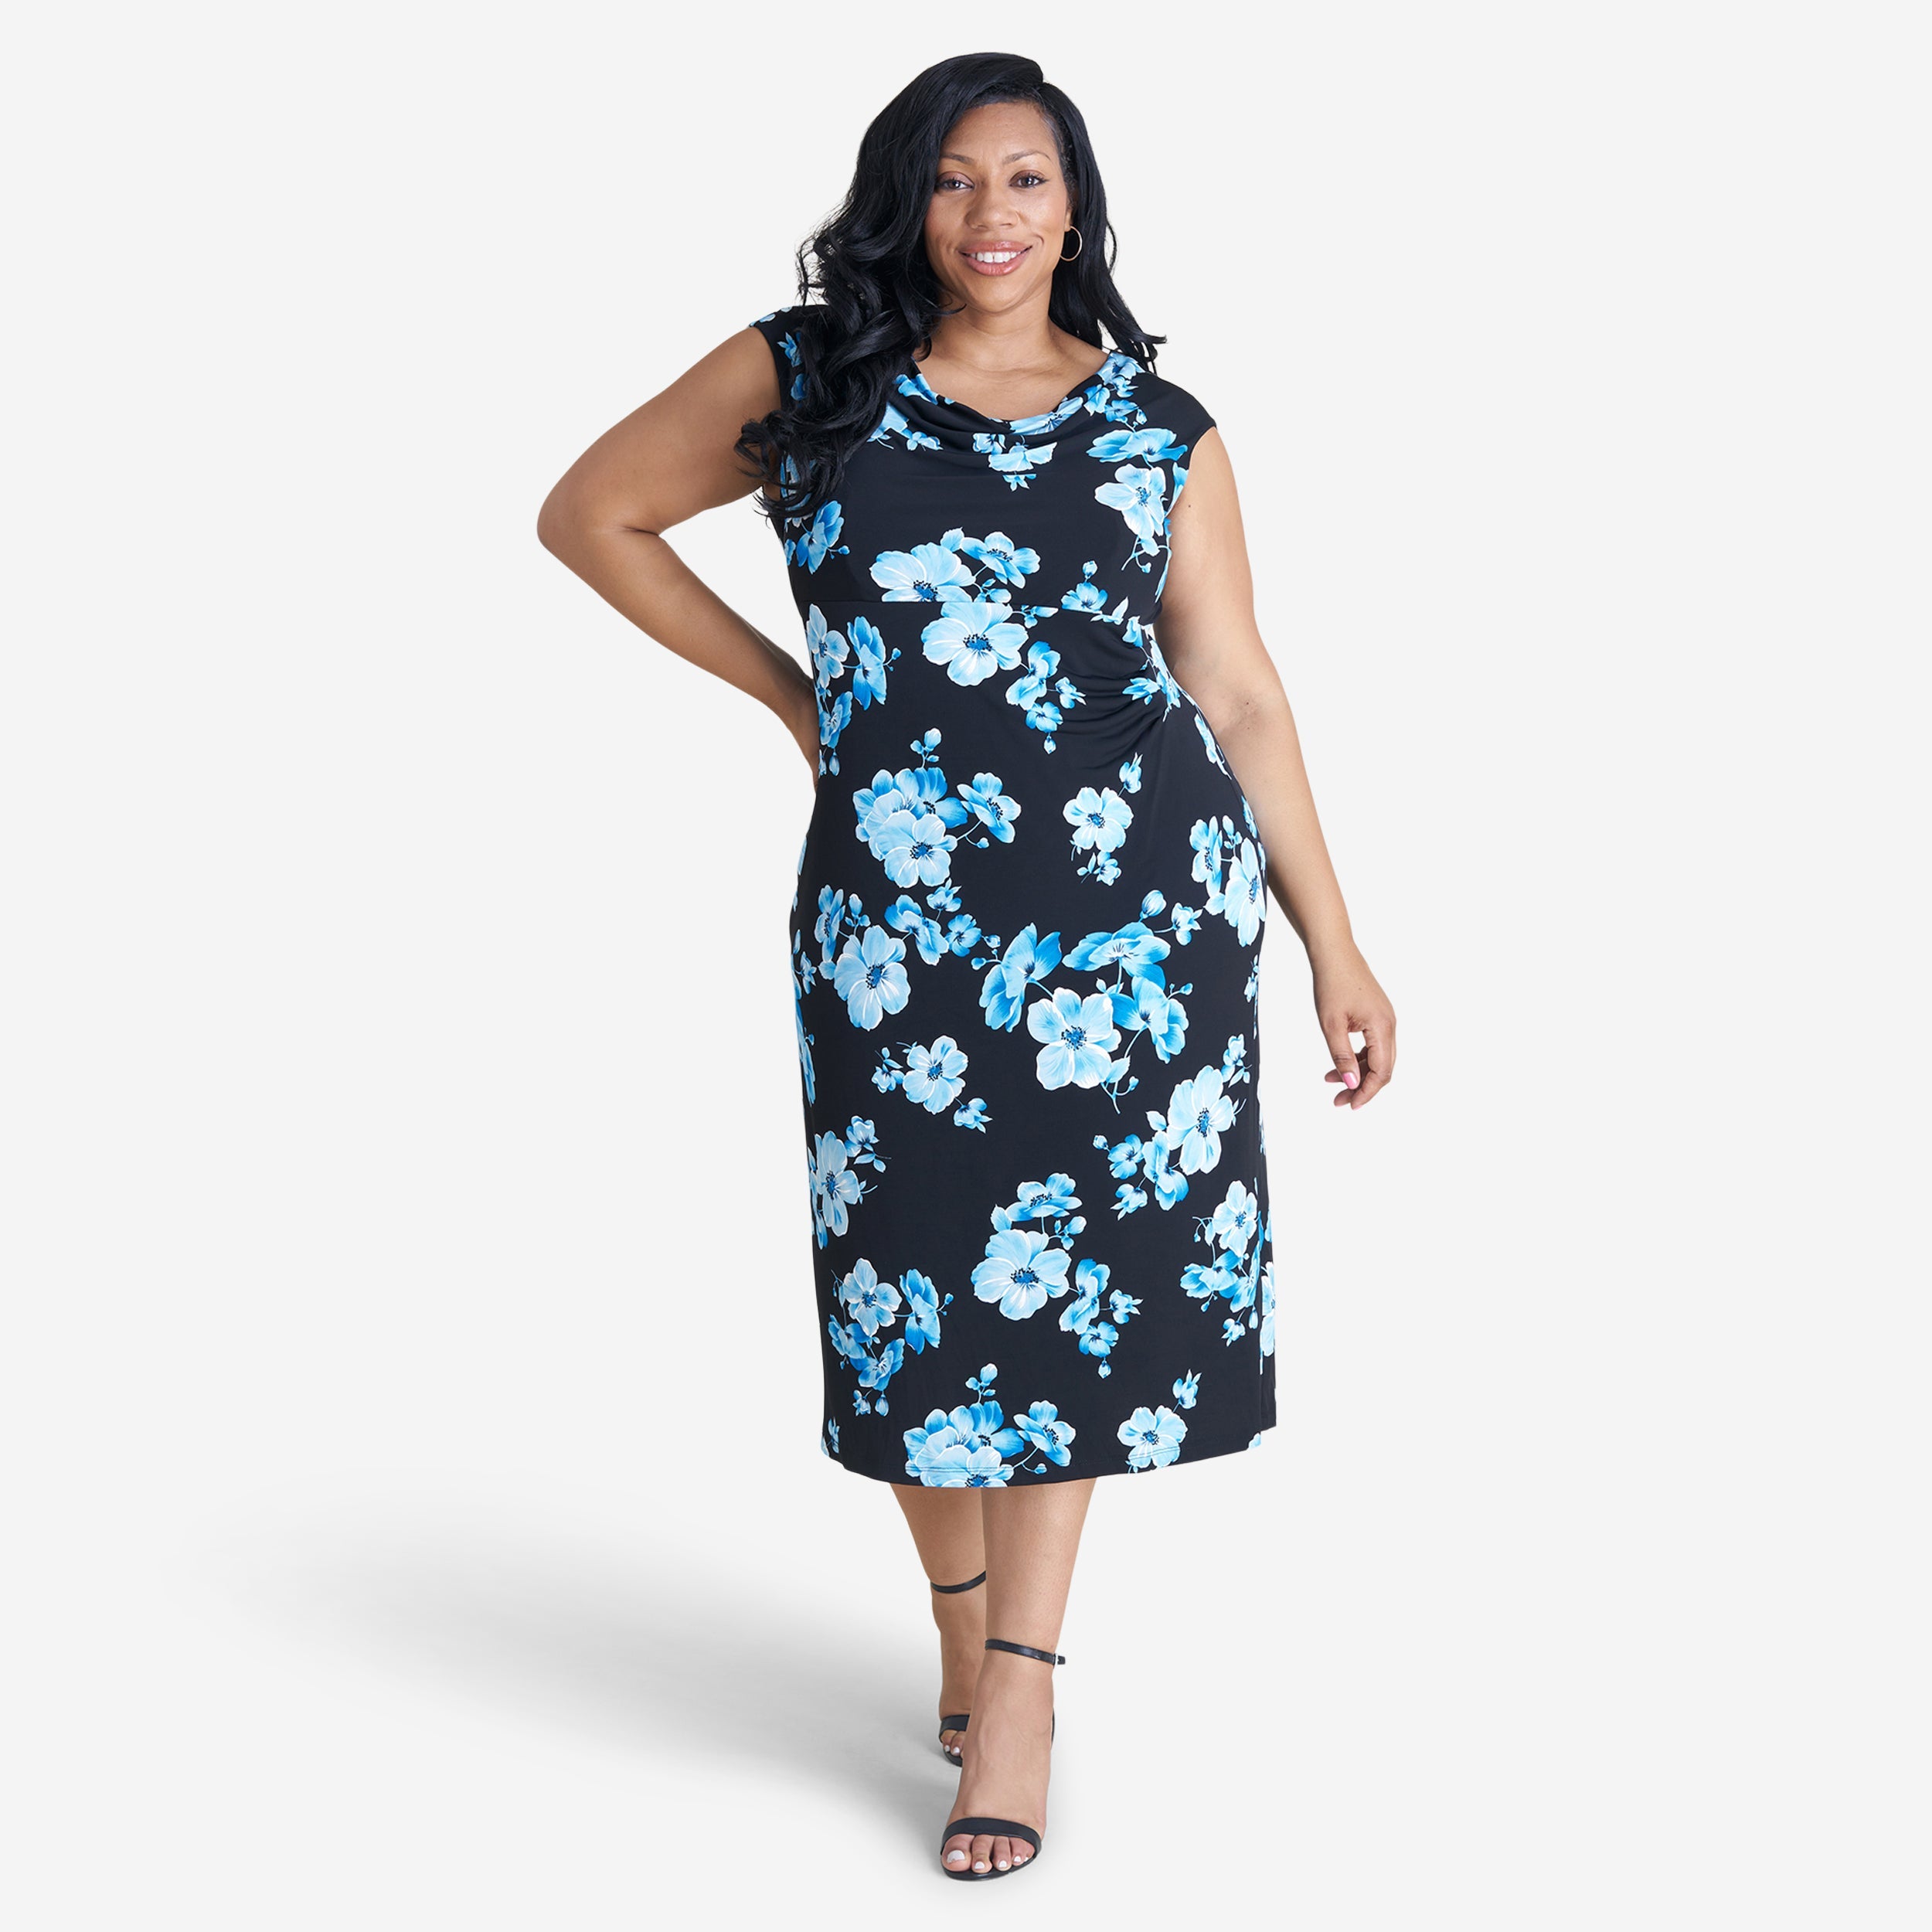 Woman posing wearing Turquoise Tonya Turquoise Floral Midi Dress from Connected Apparel